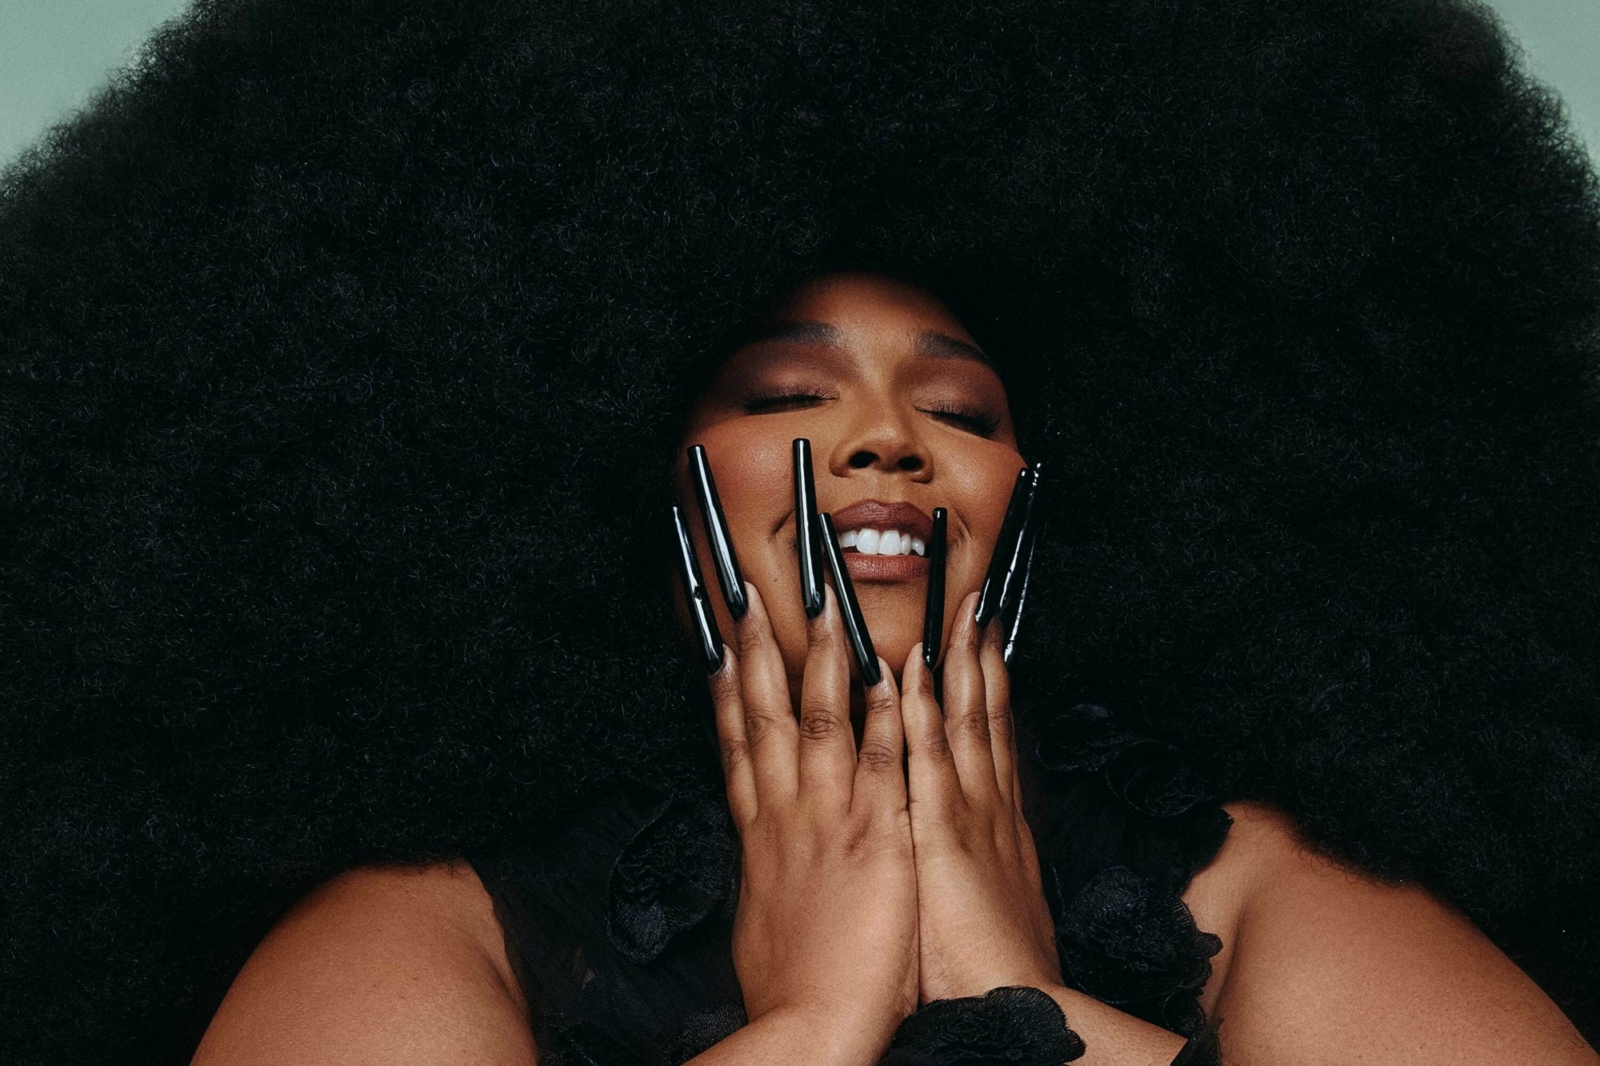 Lizzo is headlining next year's Open'er Festival